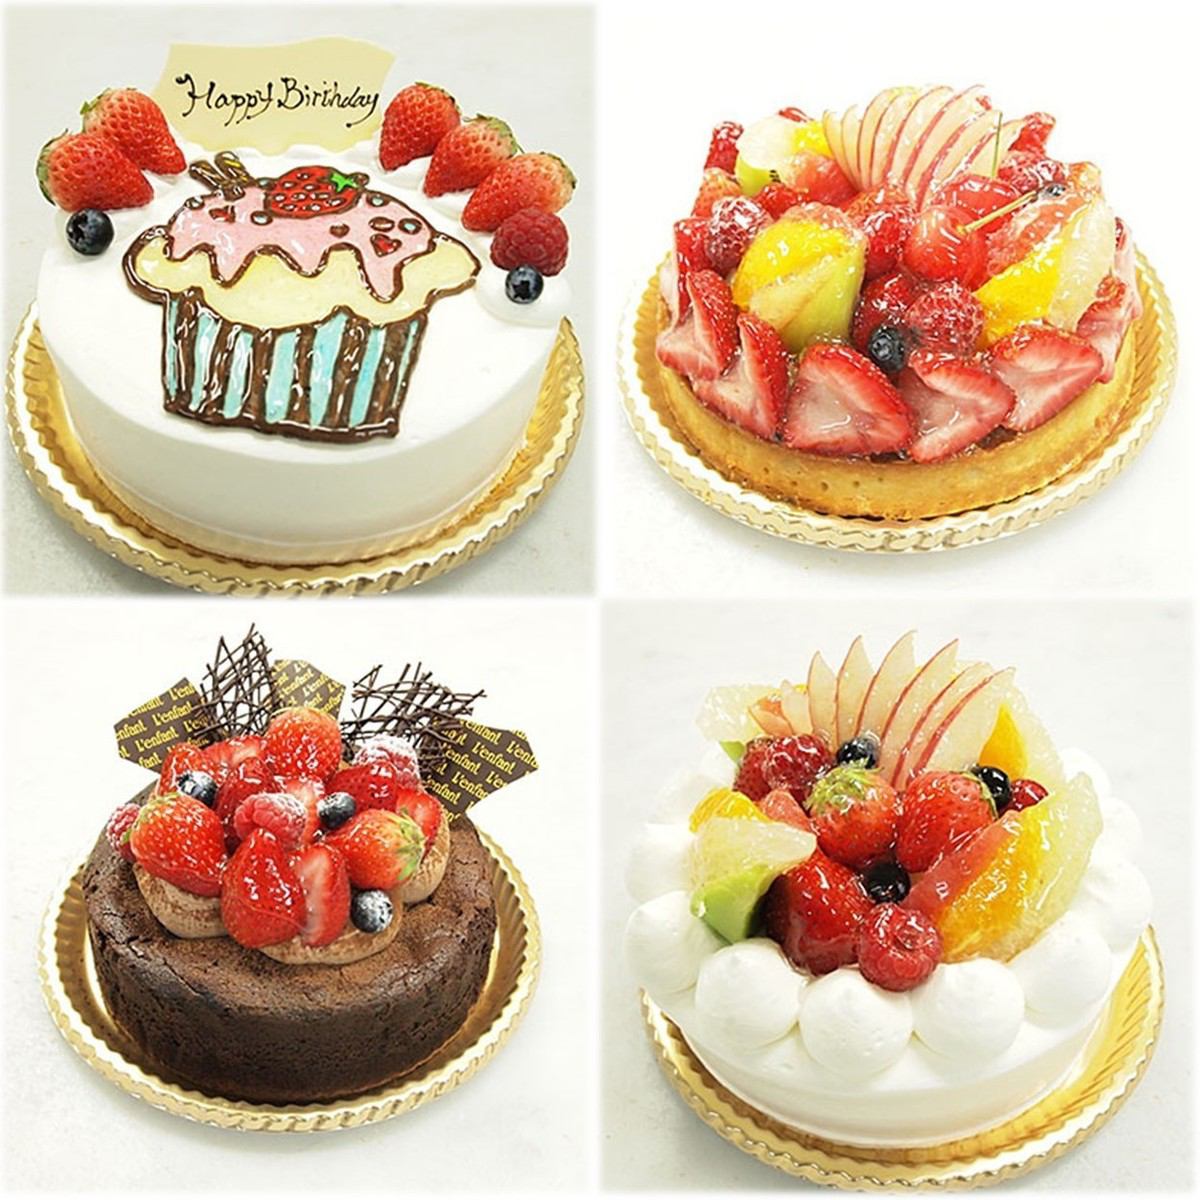 Cakes made by authentic pastry chefs from famous hotels are popular ◎